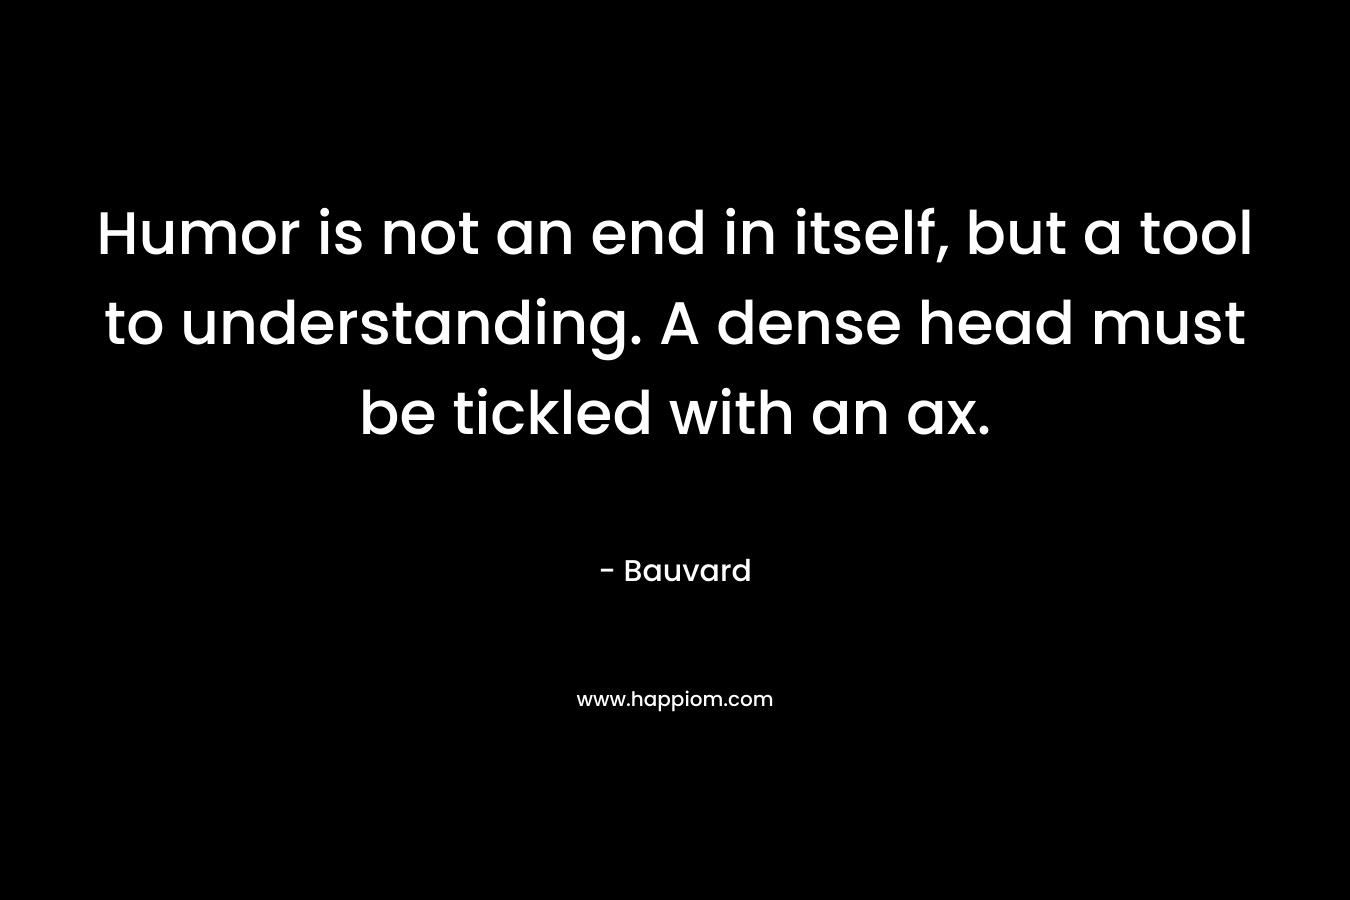 Humor is not an end in itself, but a tool to understanding. A dense head must be tickled with an ax. – Bauvard